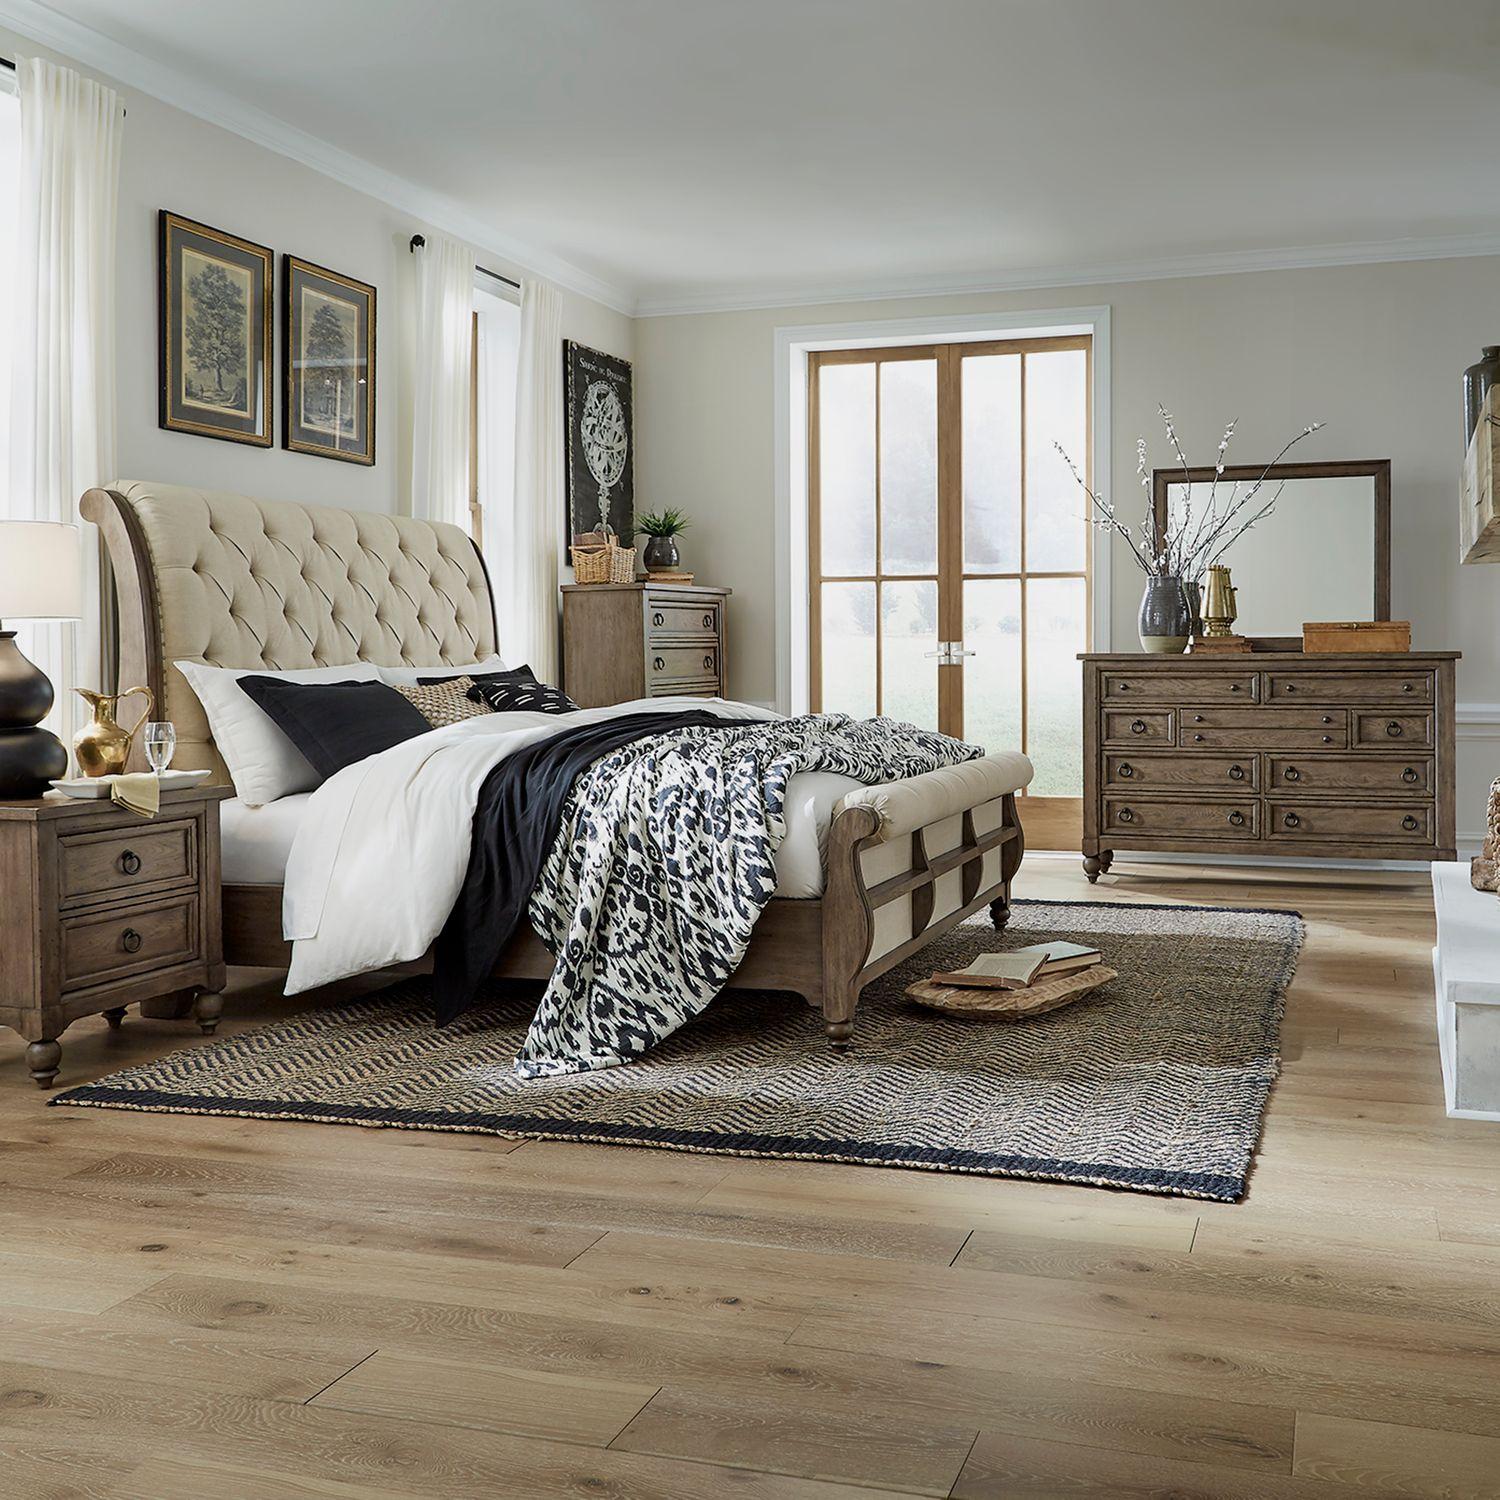 Transitional Sleigh Bedroom Set Americana Farmhouse (615-BR) 615-BR-QSLDMCN in Taupe, Black Linen